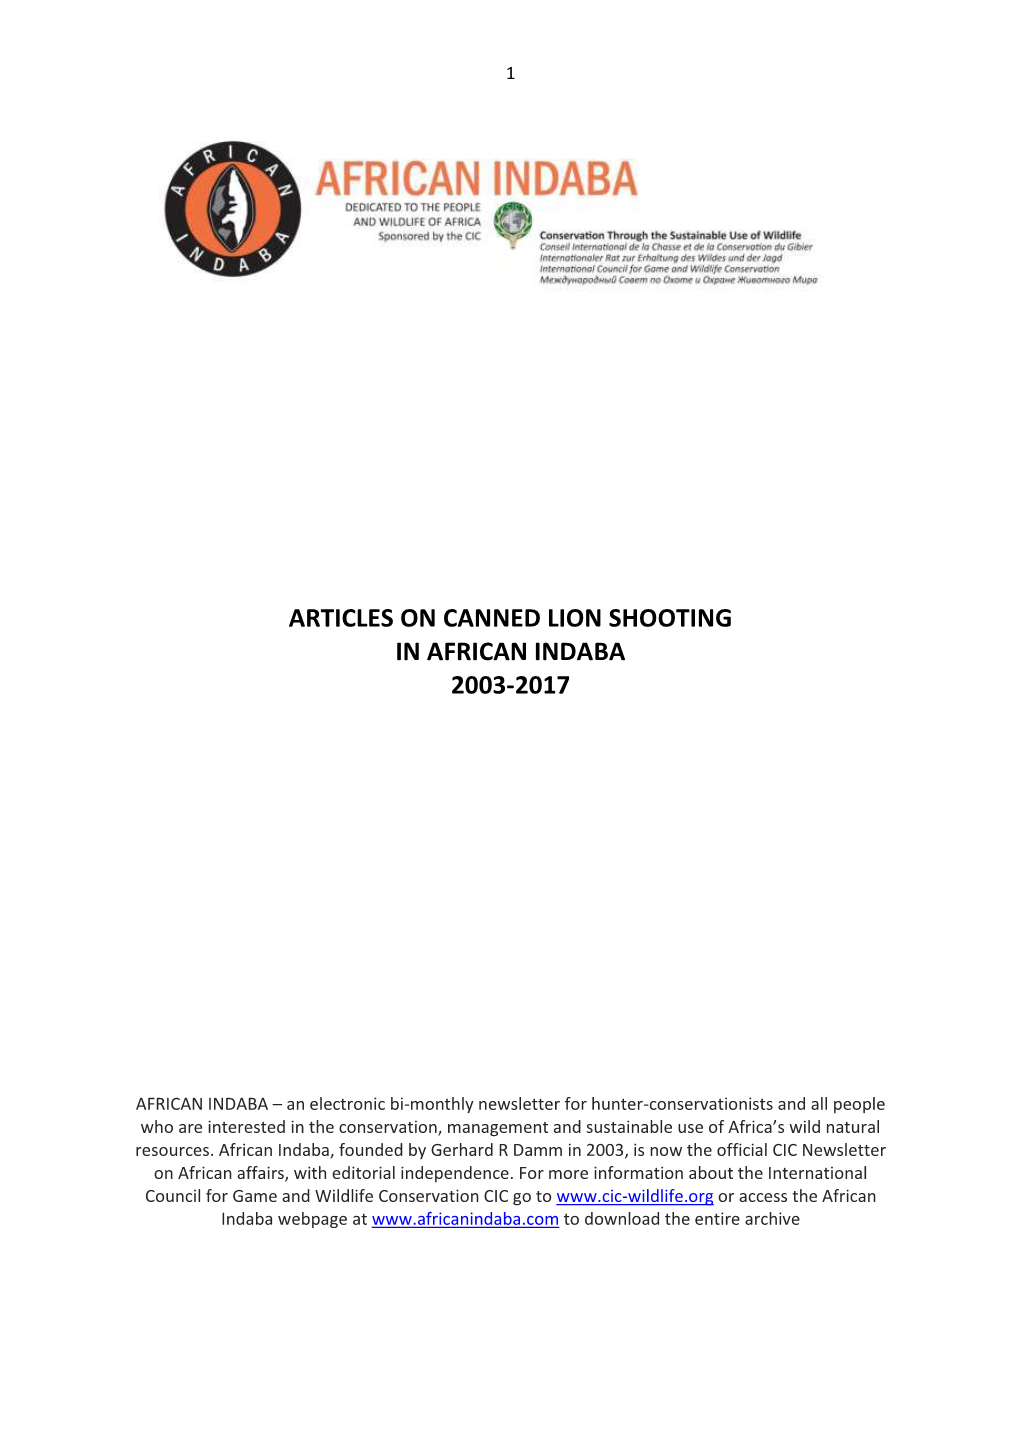 Articles on Canned Lion Shooting in African Indaba 2003-2017